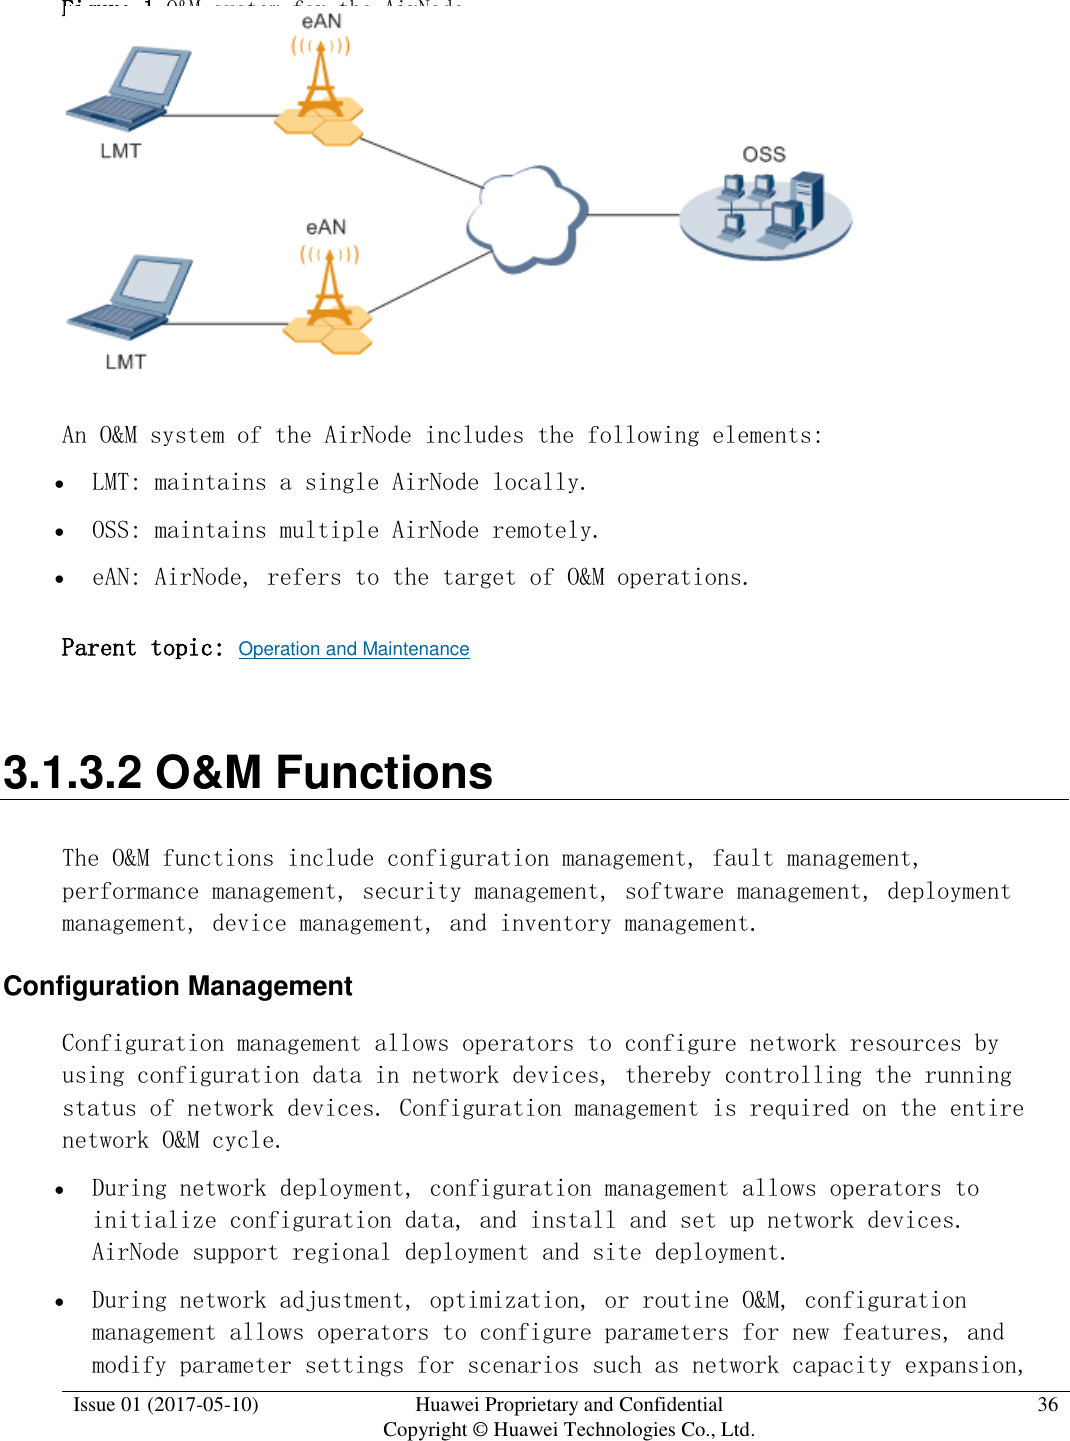  Issue 01 (2017-05-10) Huawei Proprietary and Confidential      Copyright © Huawei Technologies Co., Ltd. 36  Figure 1 O&amp;M system for the AirNode   An O&amp;M system of the AirNode includes the following elements:   LMT: maintains a single AirNode locally.  OSS: maintains multiple AirNode remotely.  eAN: AirNode, refers to the target of O&amp;M operations. Parent topic: Operation and Maintenance 3.1.3.2 O&amp;M Functions The O&amp;M functions include configuration management, fault management, performance management, security management, software management, deployment management, device management, and inventory management.  Configuration Management Configuration management allows operators to configure network resources by using configuration data in network devices, thereby controlling the running status of network devices. Configuration management is required on the entire network O&amp;M cycle.   During network deployment, configuration management allows operators to initialize configuration data, and install and set up network devices. AirNode support regional deployment and site deployment.  During network adjustment, optimization, or routine O&amp;M, configuration management allows operators to configure parameters for new features, and modify parameter settings for scenarios such as network capacity expansion, 